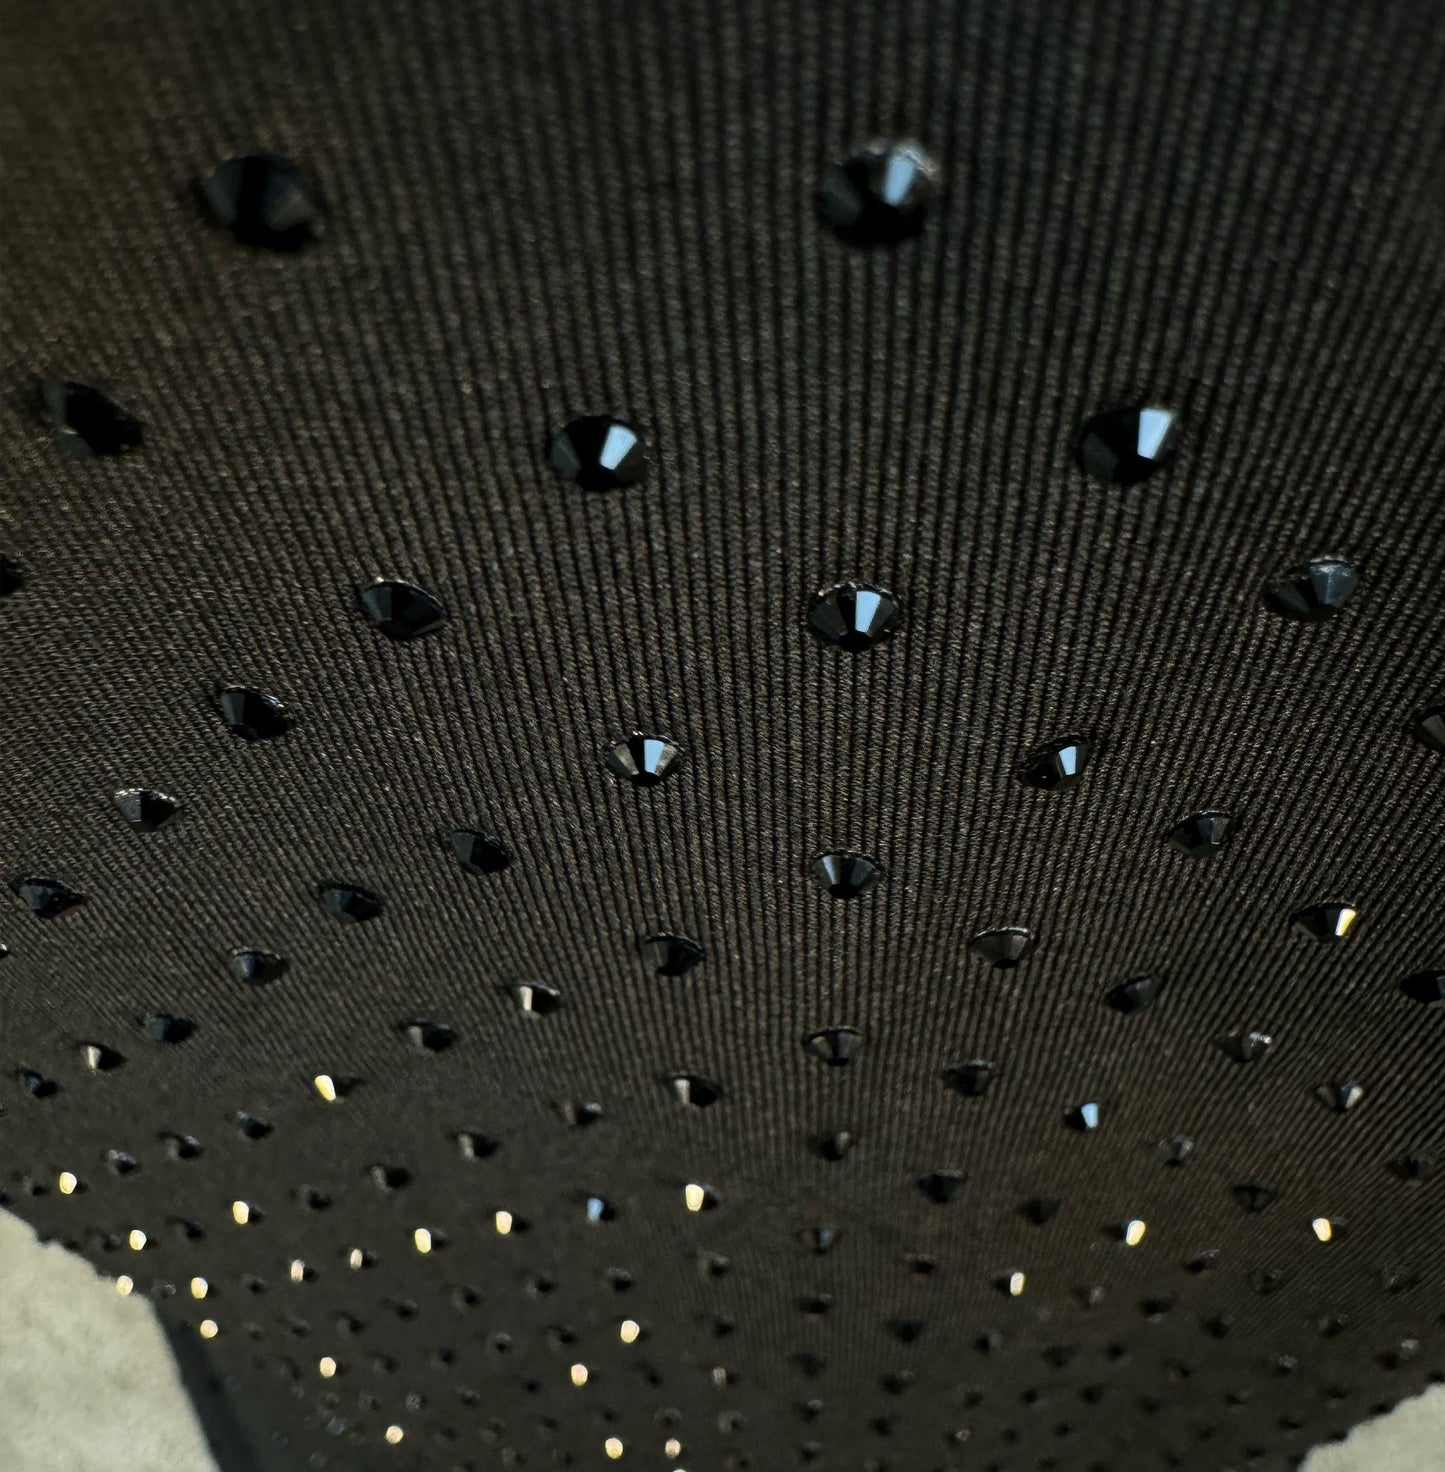 Looking down at Jet Black Crystals on Black Fabric Dotted T-shirt showing a close up of the rhinestone grid pattern and the sparkles as your focus shifts.